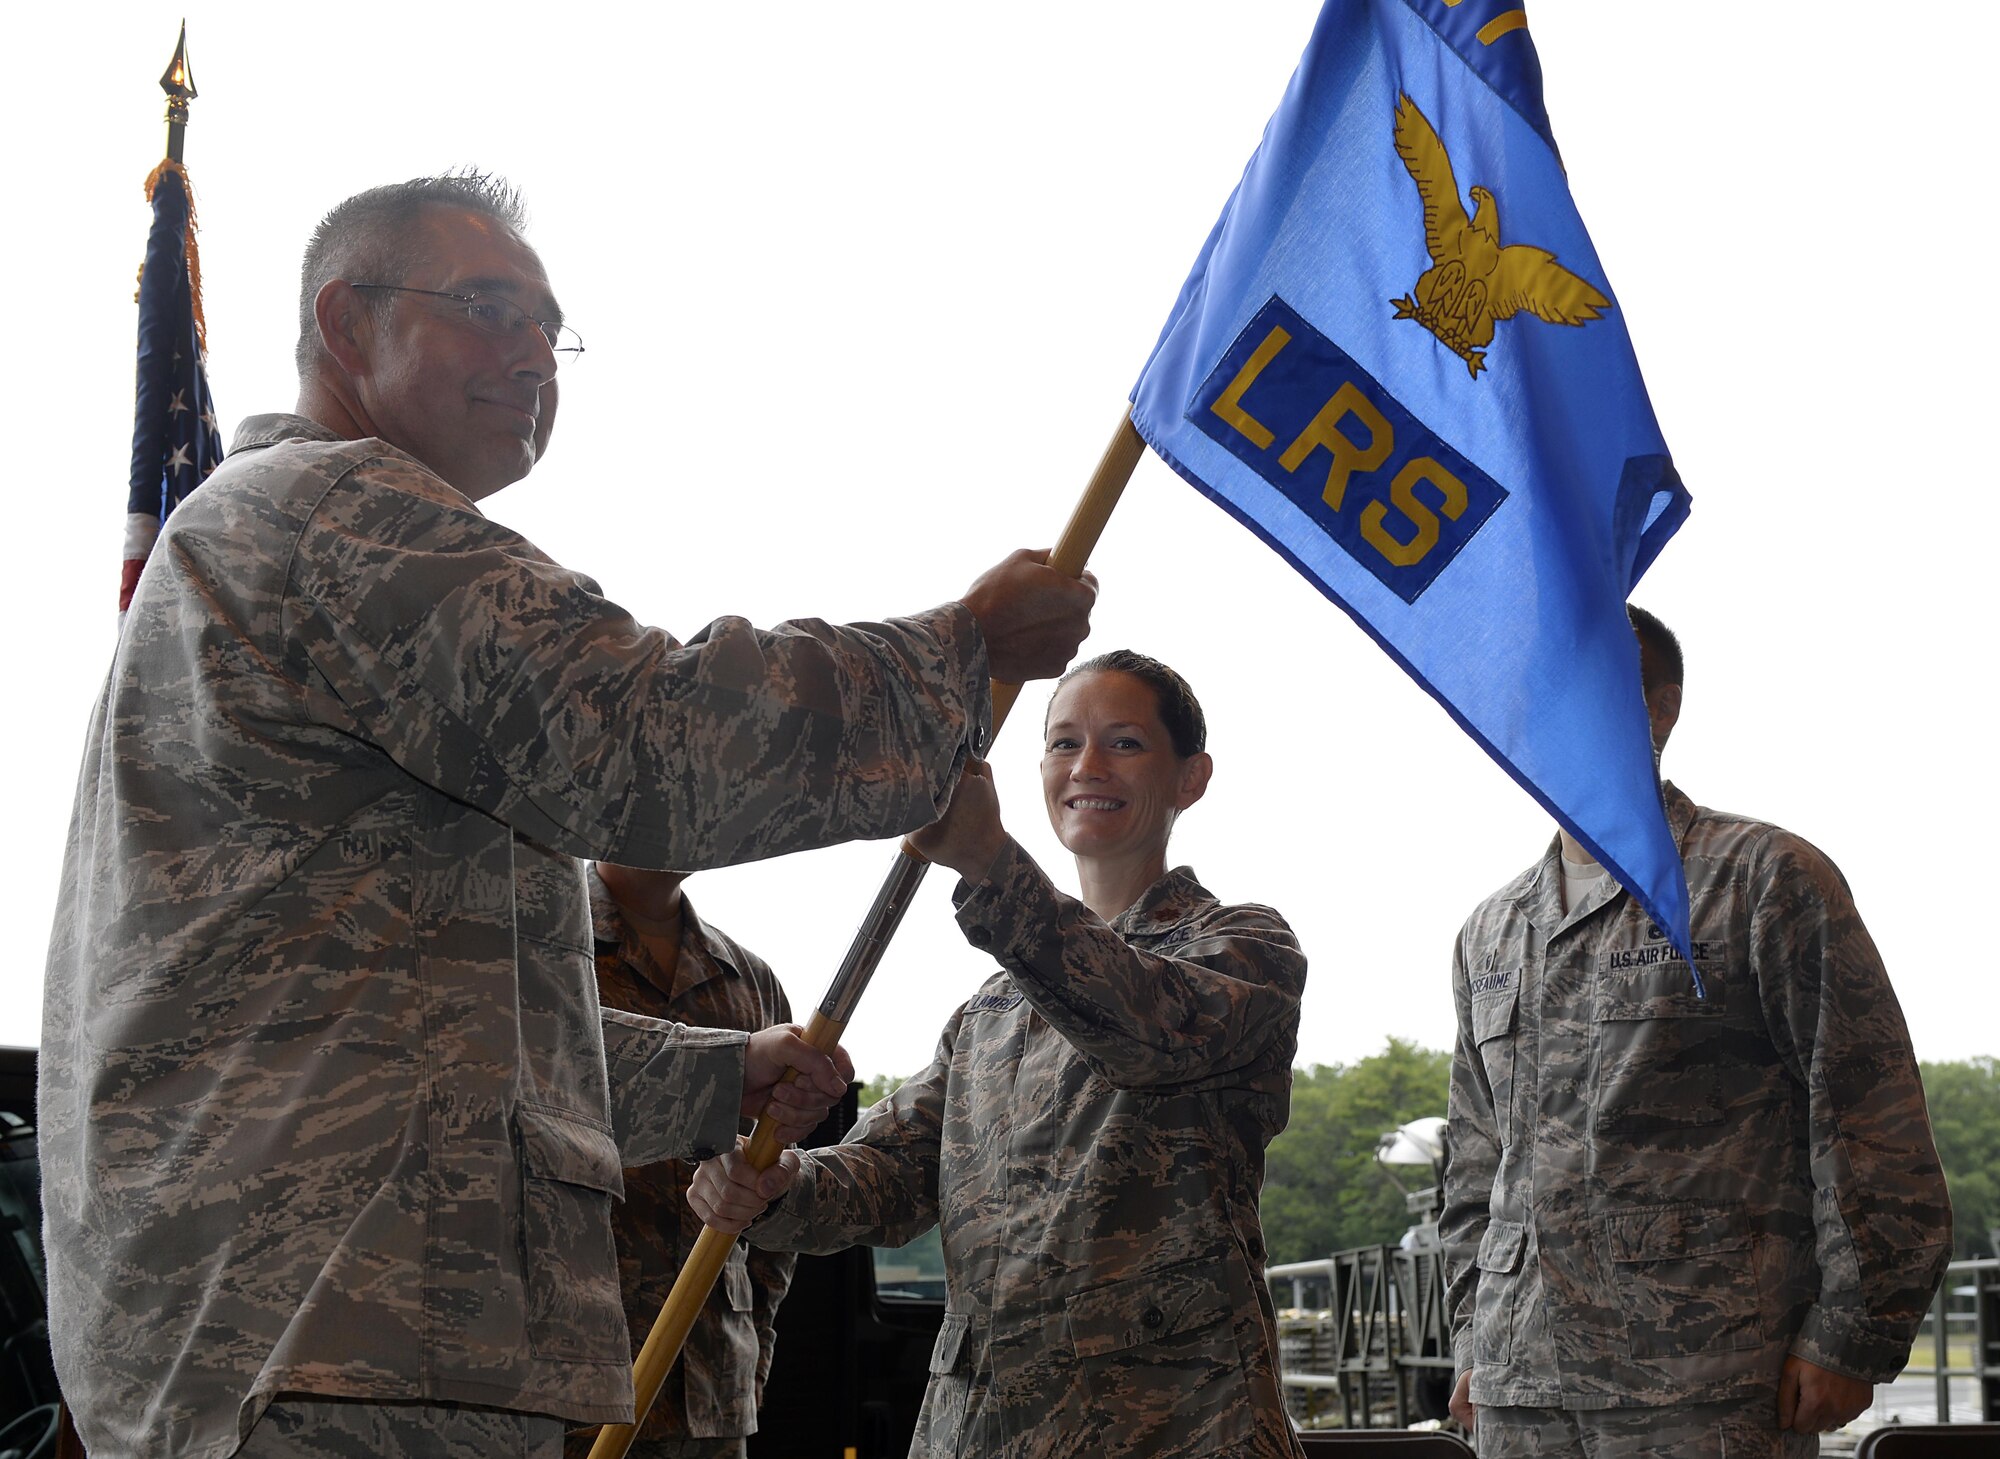 U.S. Air National Guard Maj. Emily C. Lawrence, receives the guidon from U.S. Air National Guard Lt. Col. Paul N. Loiselle, the mission support group commander, during a change of command ceremony August 5, 2017, at Pease Air National Guard Base, N.H.